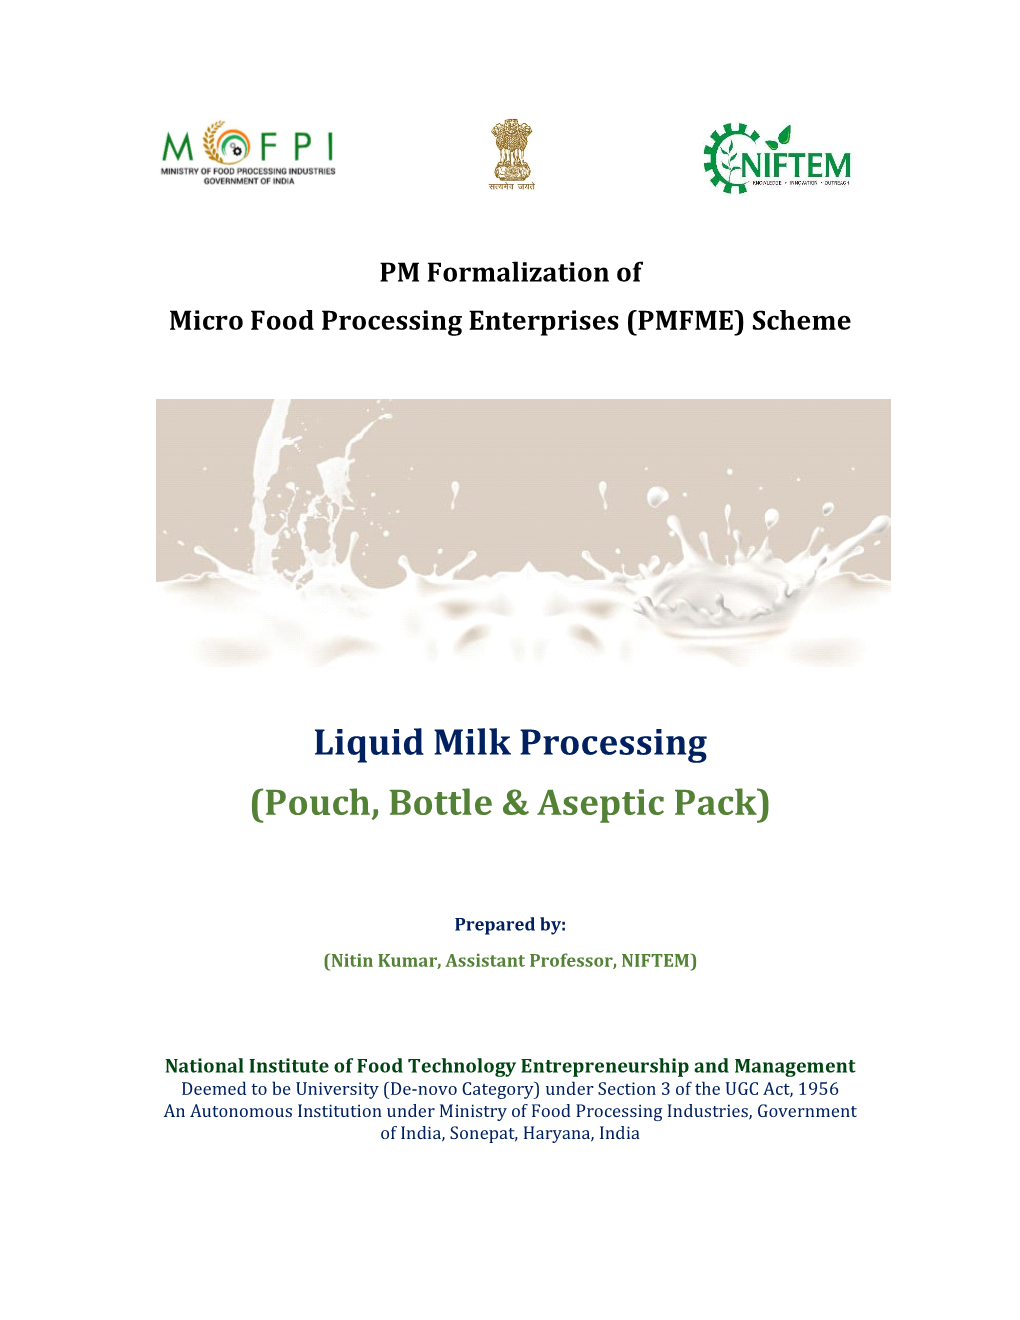 Liquid Milk Processing (Pouch, Bottle & Aseptic Pack)